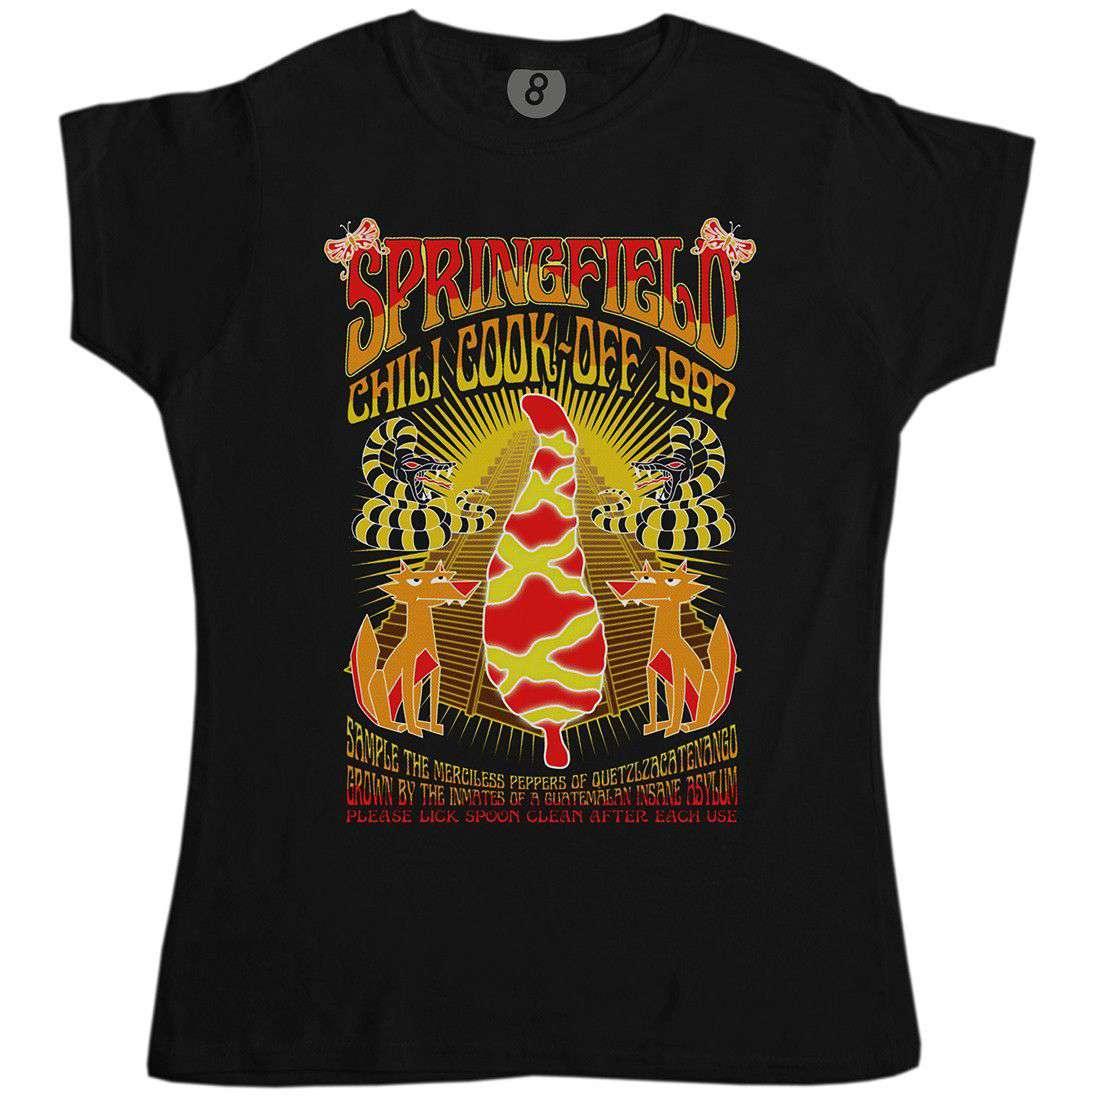 Springfield Chili Cook Off T-Shirt for Women 8Ball